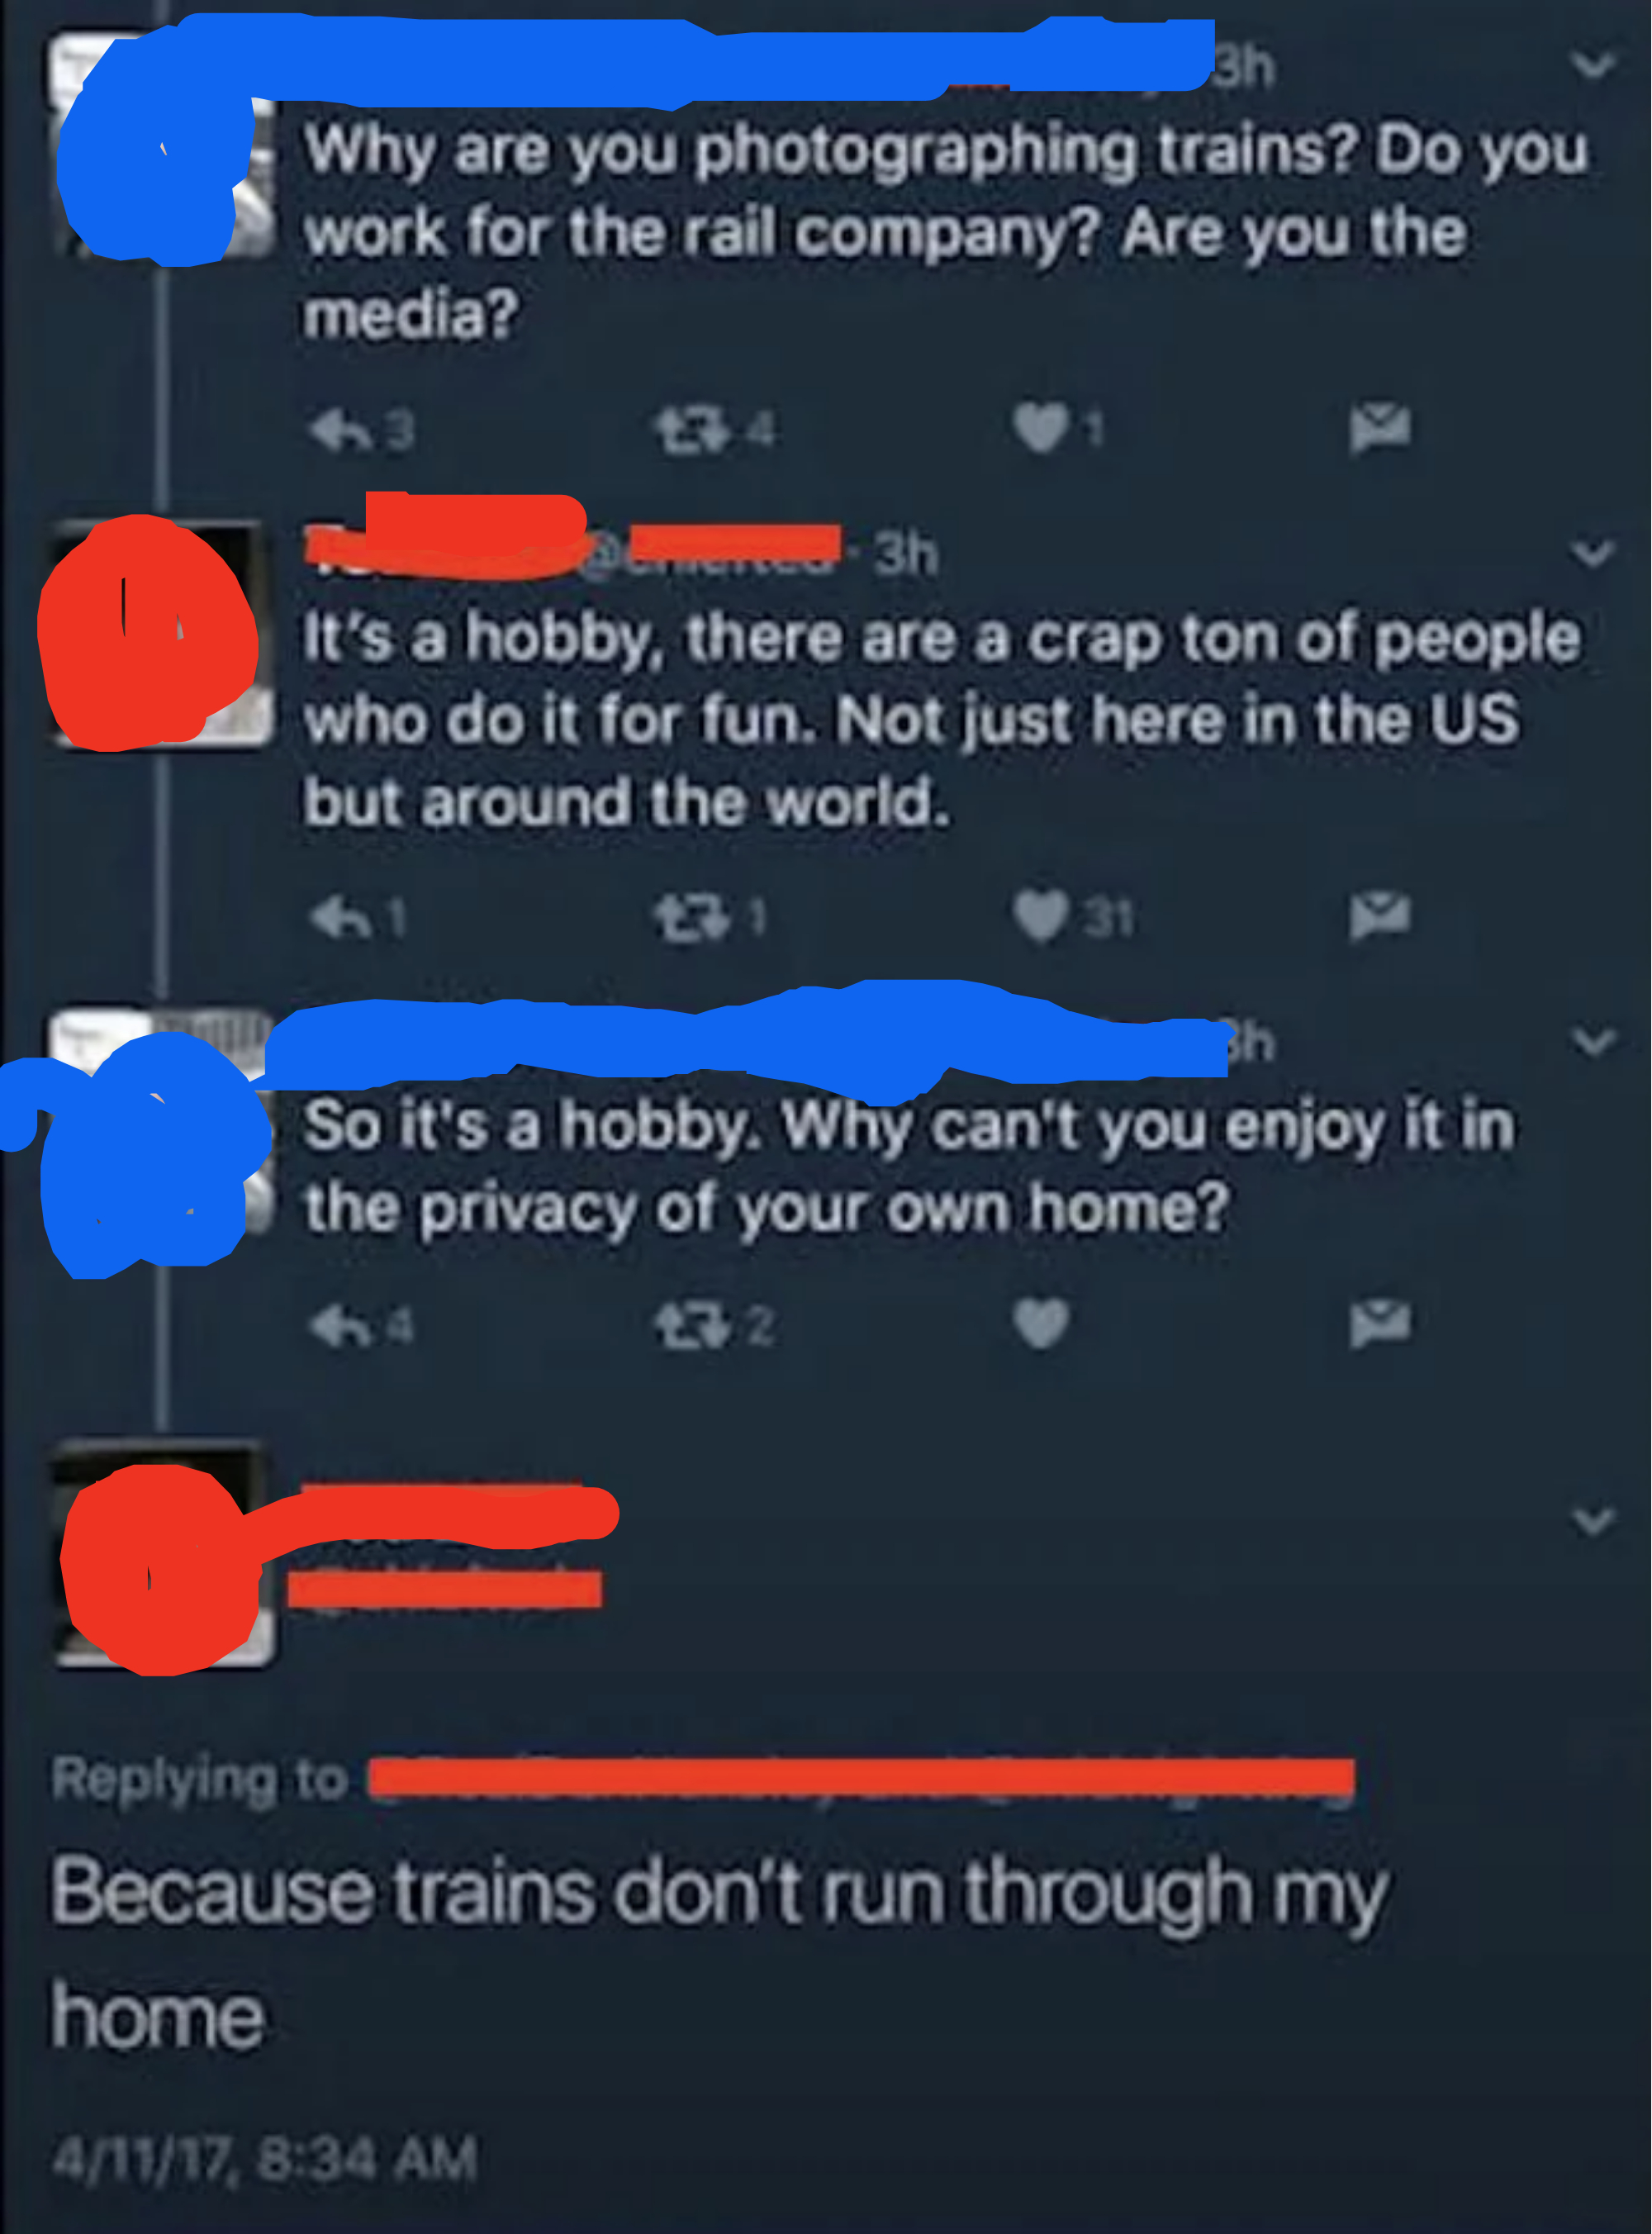 person asks why another can&#x27;t do their hobby of taking pictures of trains from their home and the person responds, because trains don&#x27;t run through my home